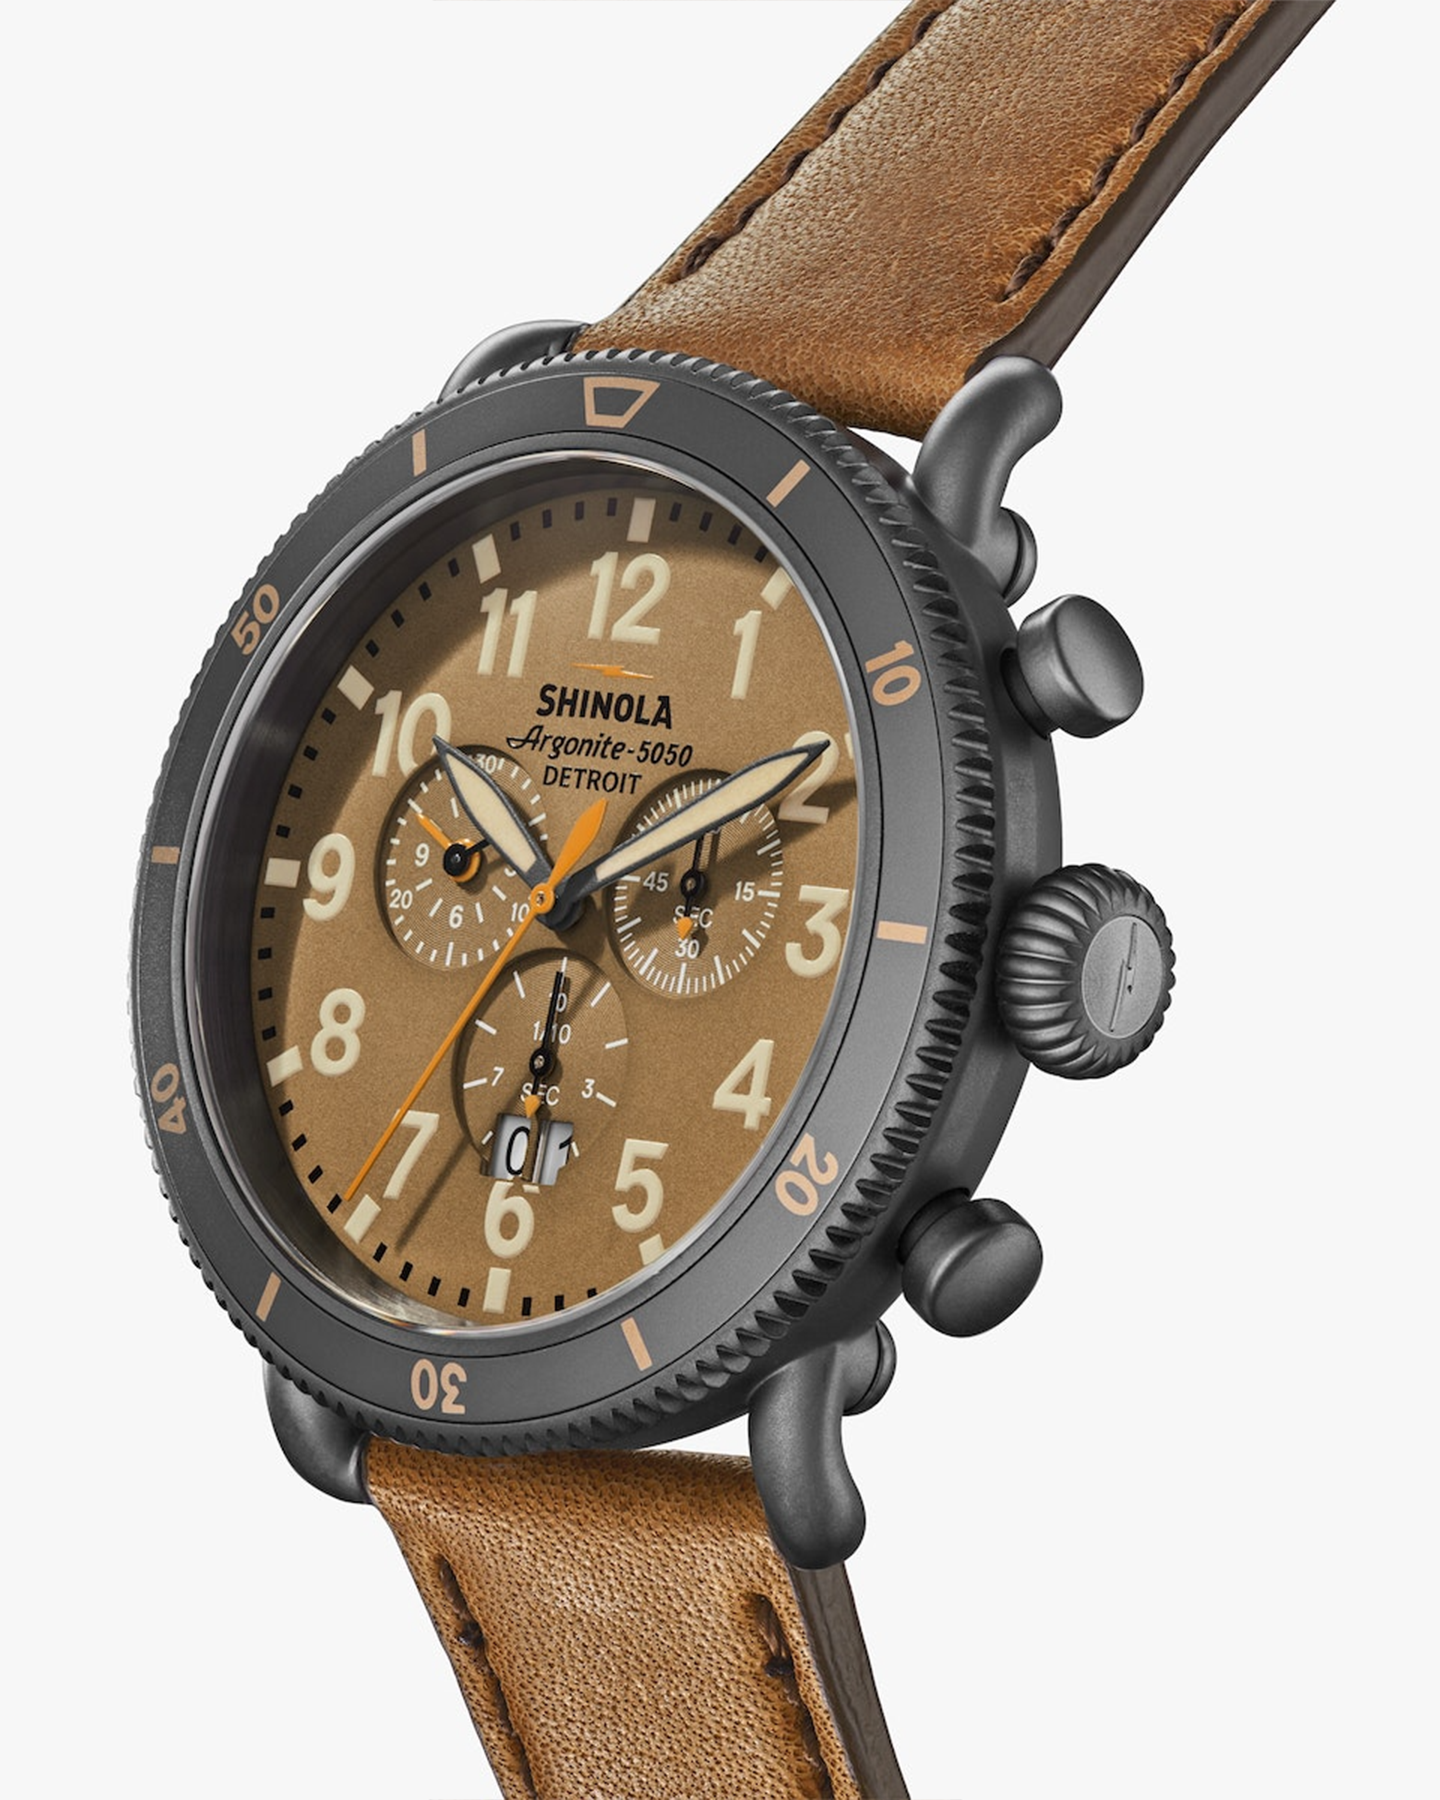 THE RUNWELL SPORT CHRONO 48MM WITH LEATHER STRAP IN DARK CAMEL